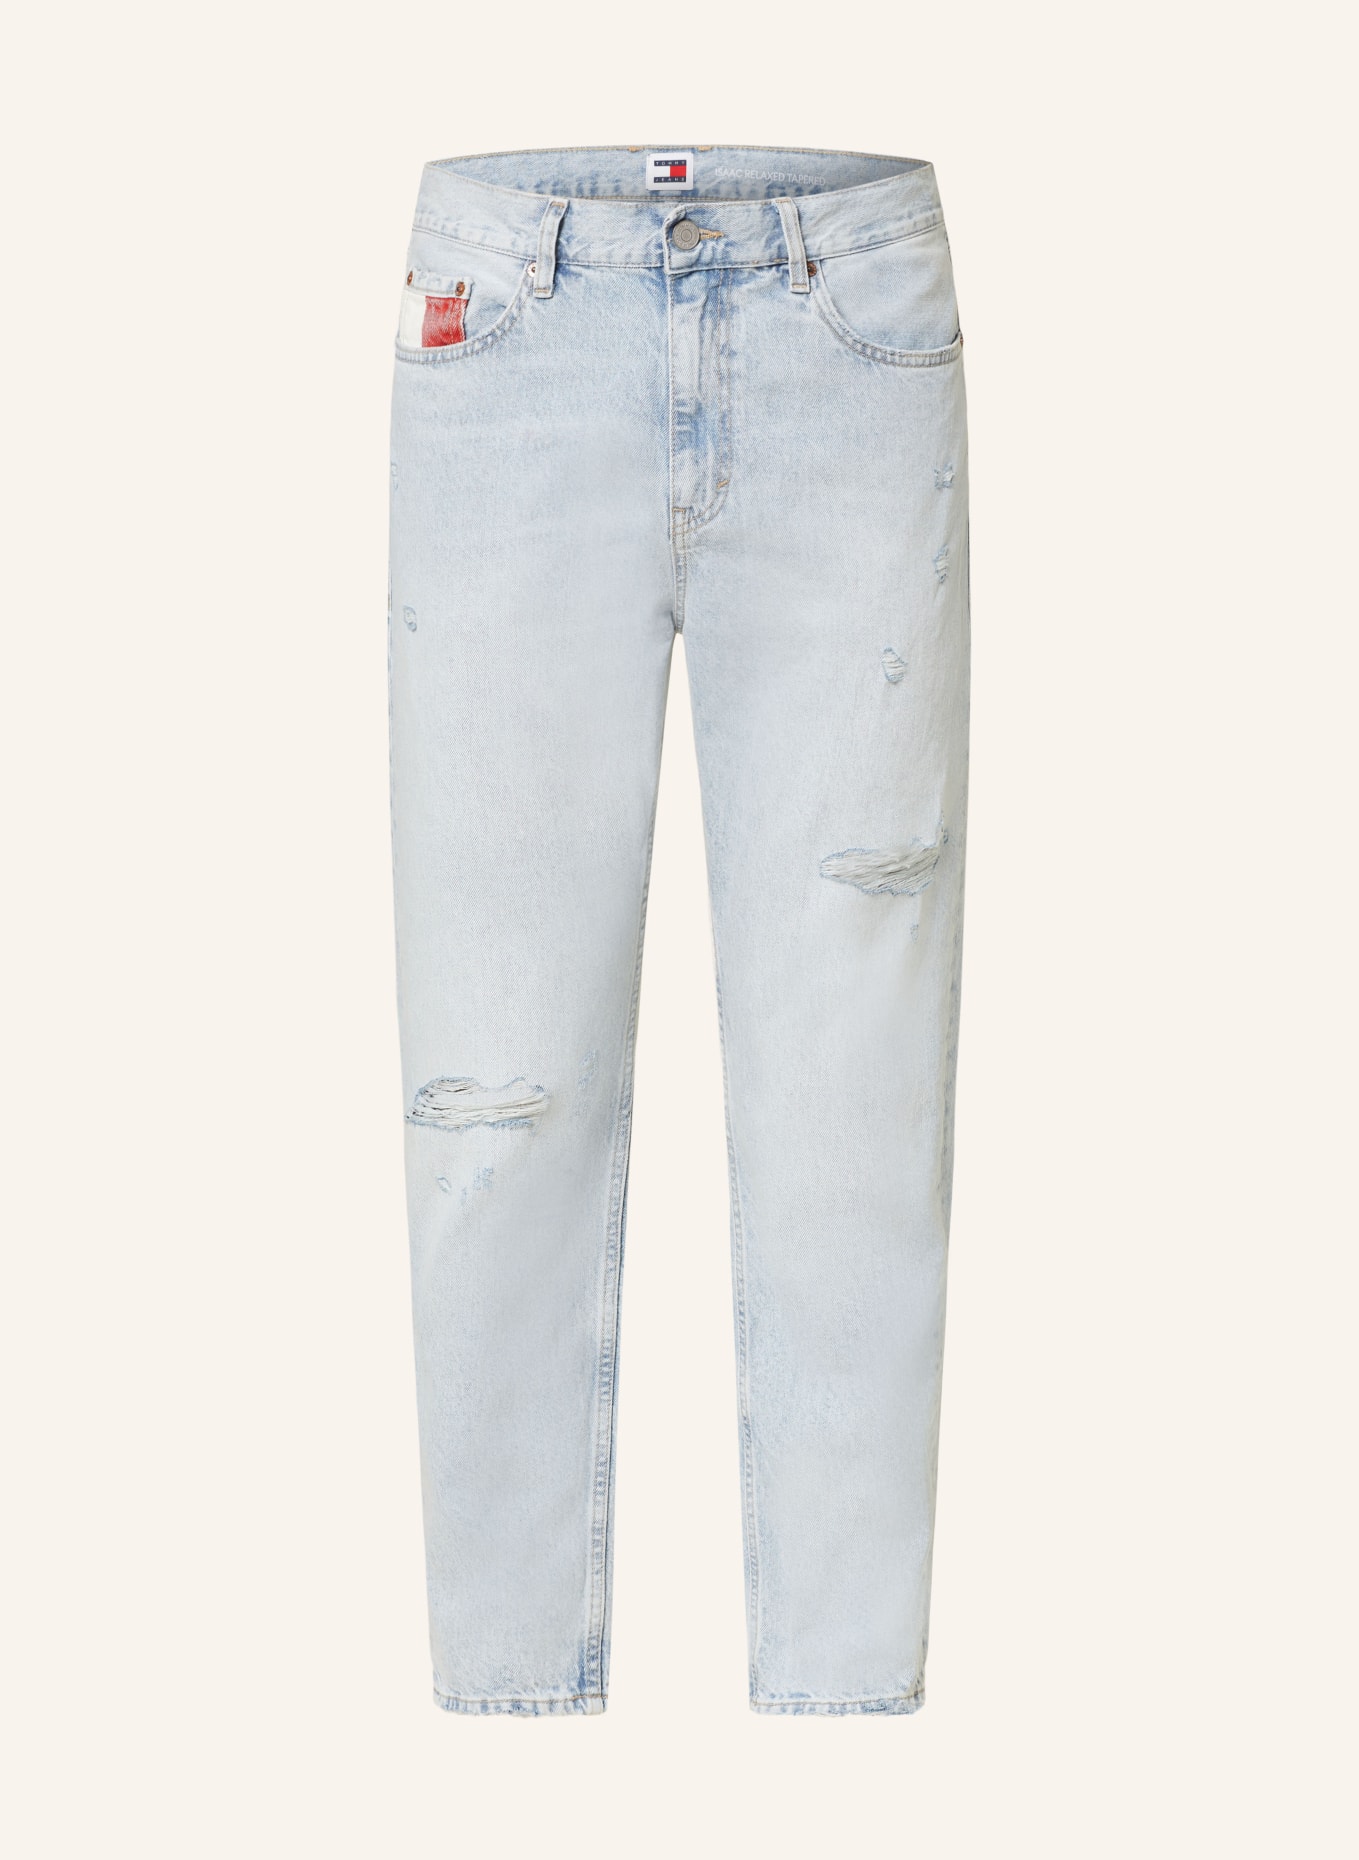 TOMMY JEANS Jeans ISAAC Relaxed Tapered Fit, Farbe: 1AB Denim Light (Bild 1)